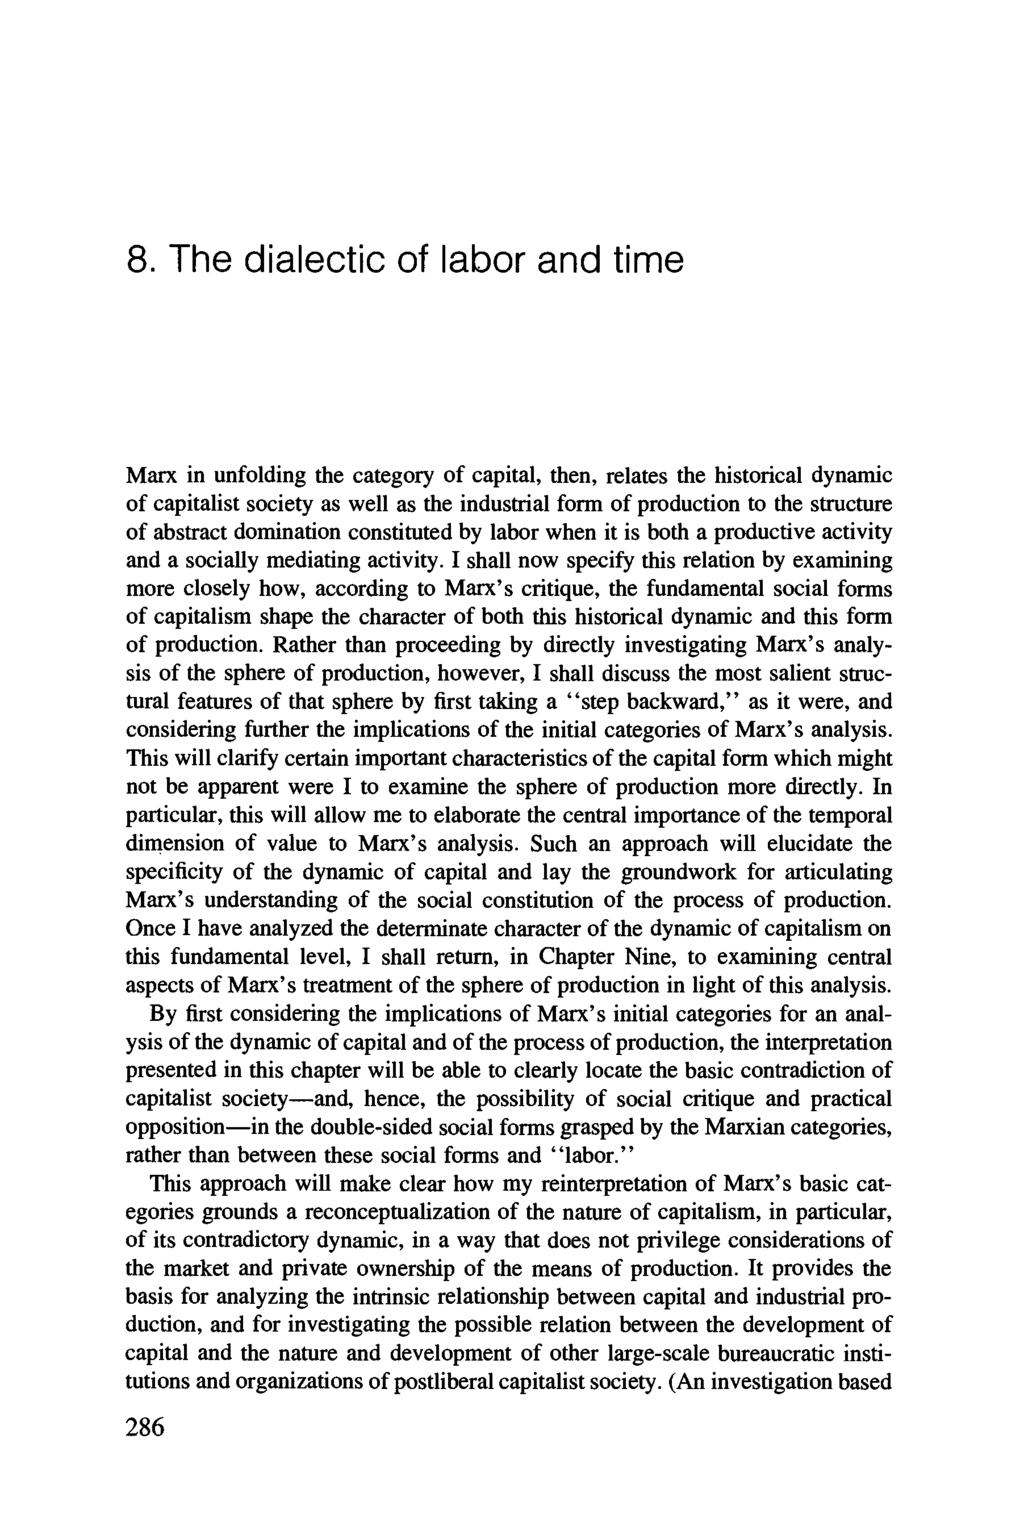 8. The dialectic of labor and time Marx in unfolding the category of capital, then, relates the historical dynamic of capitalist society as well as the industrial form of production to the structure